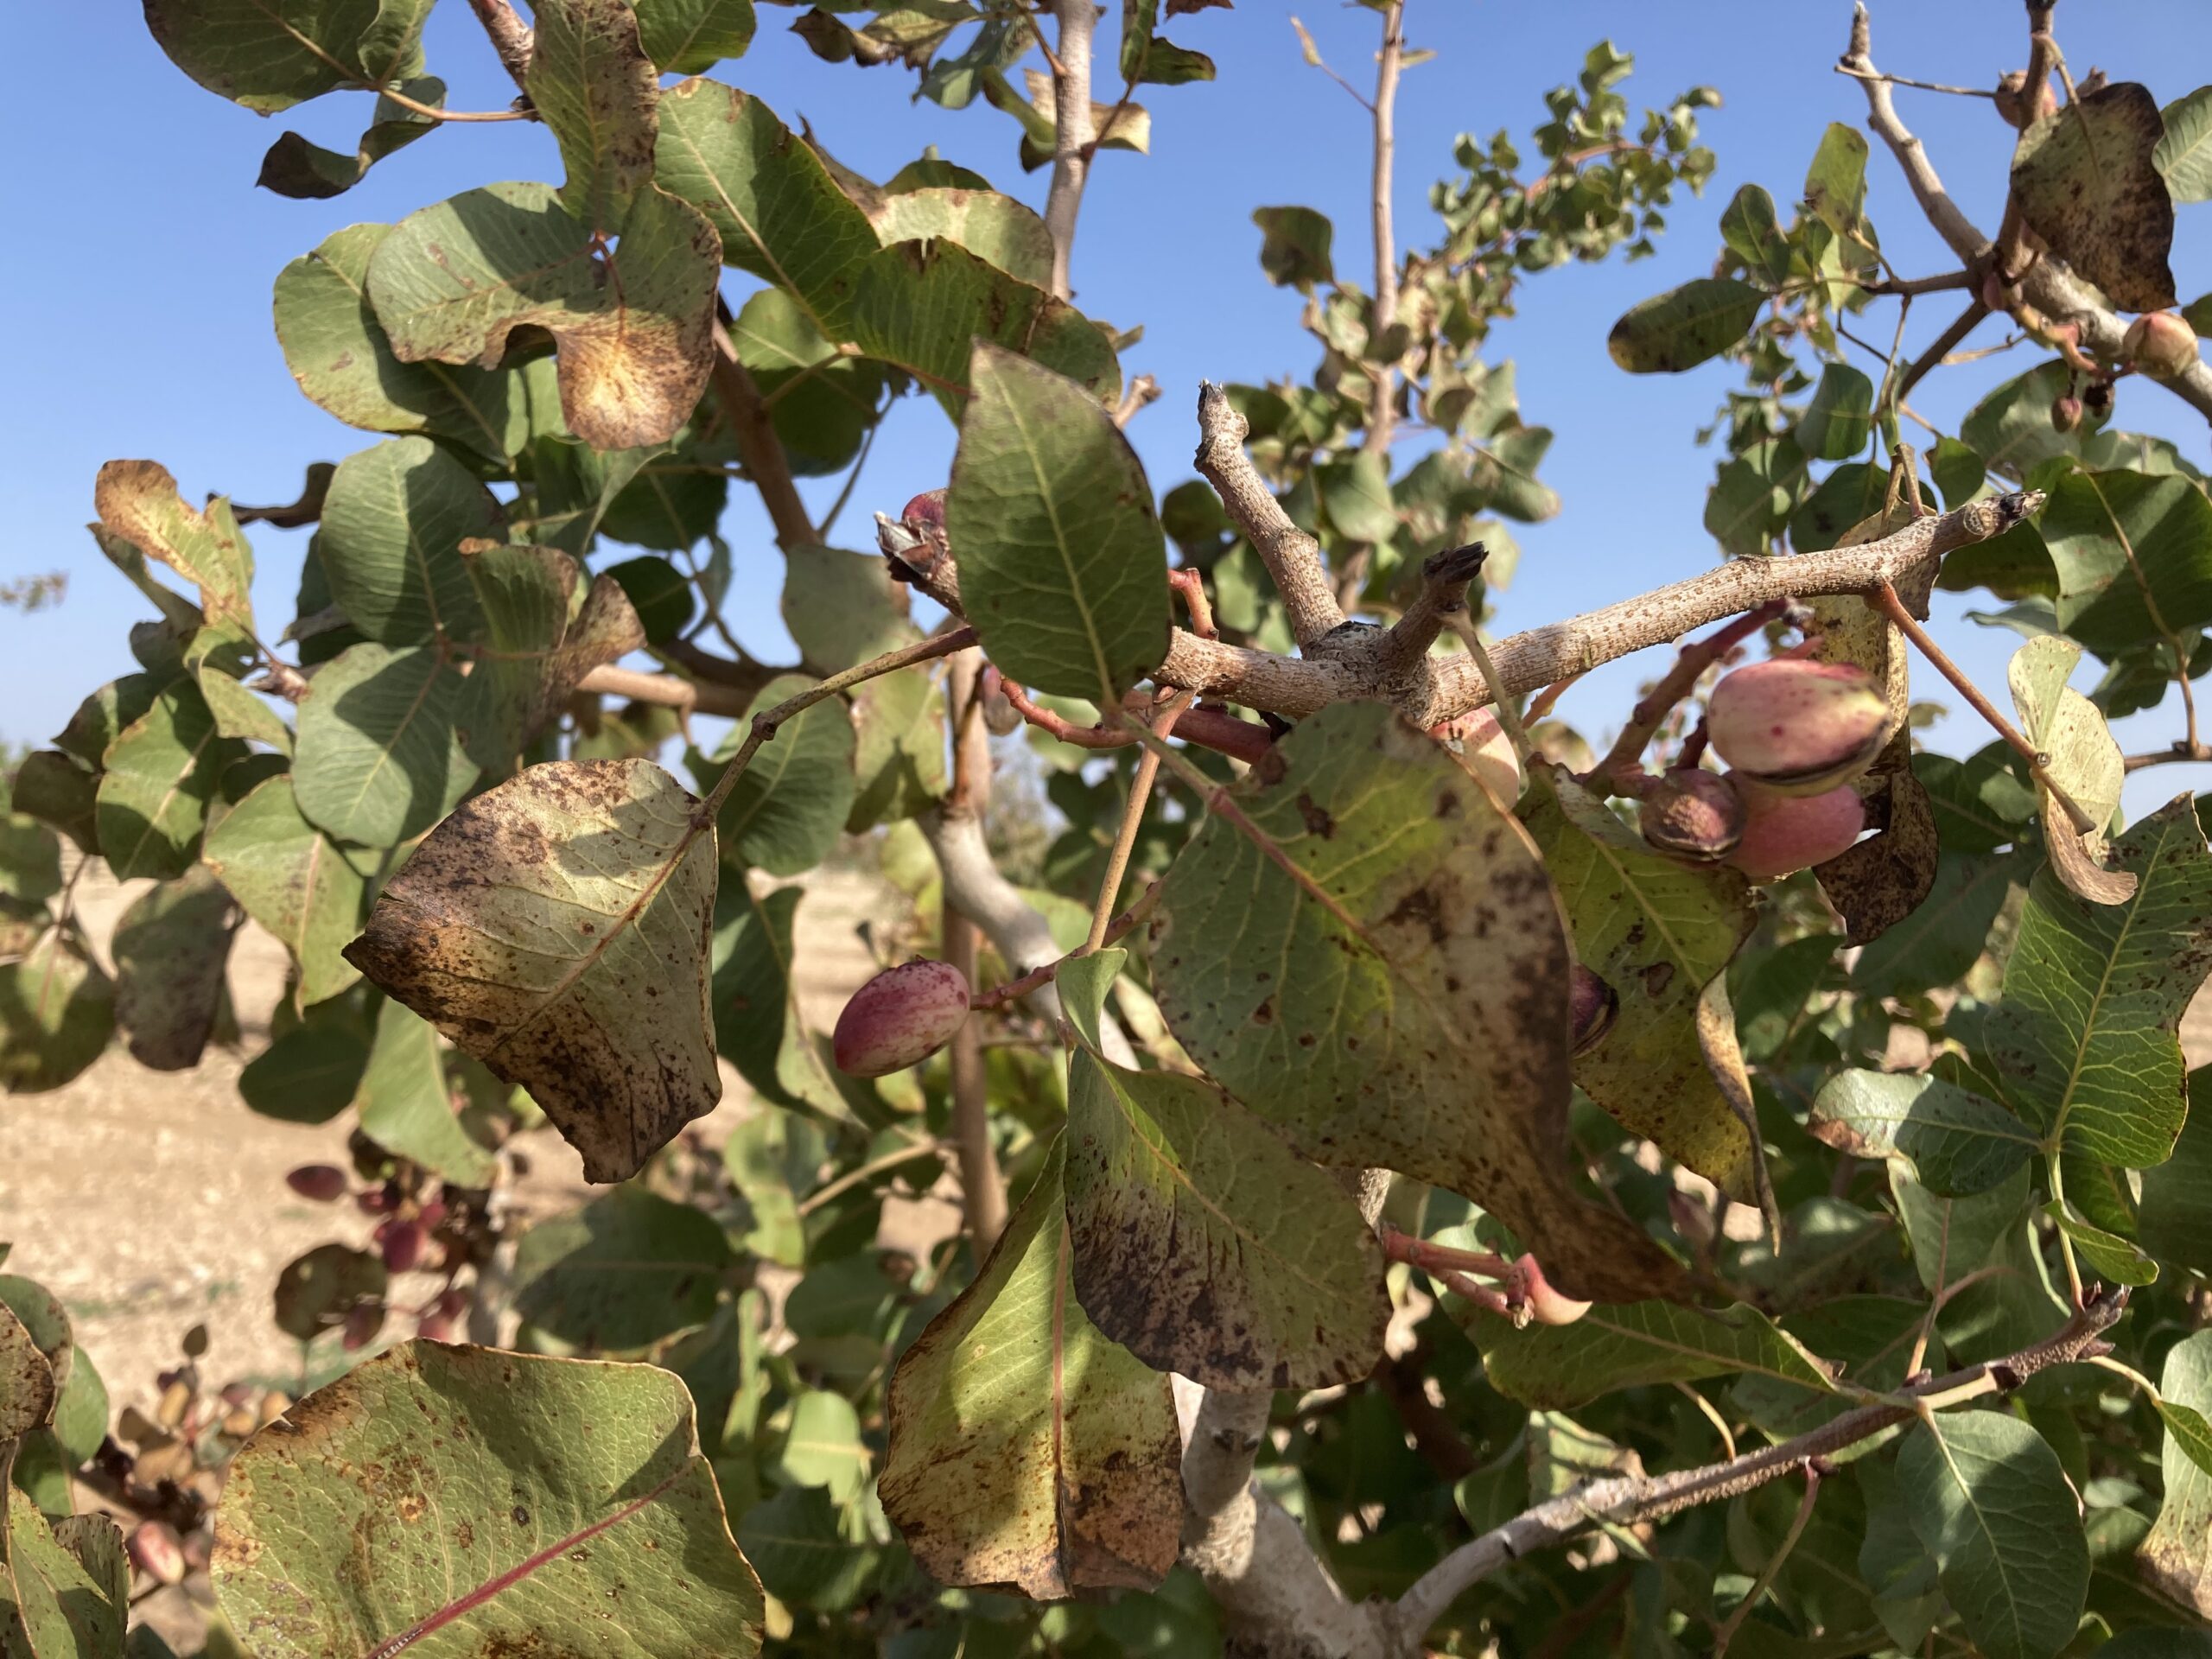 PISTACHIO: PRECISION IRRIGATION FOR WATERING THE GREEN GOLD